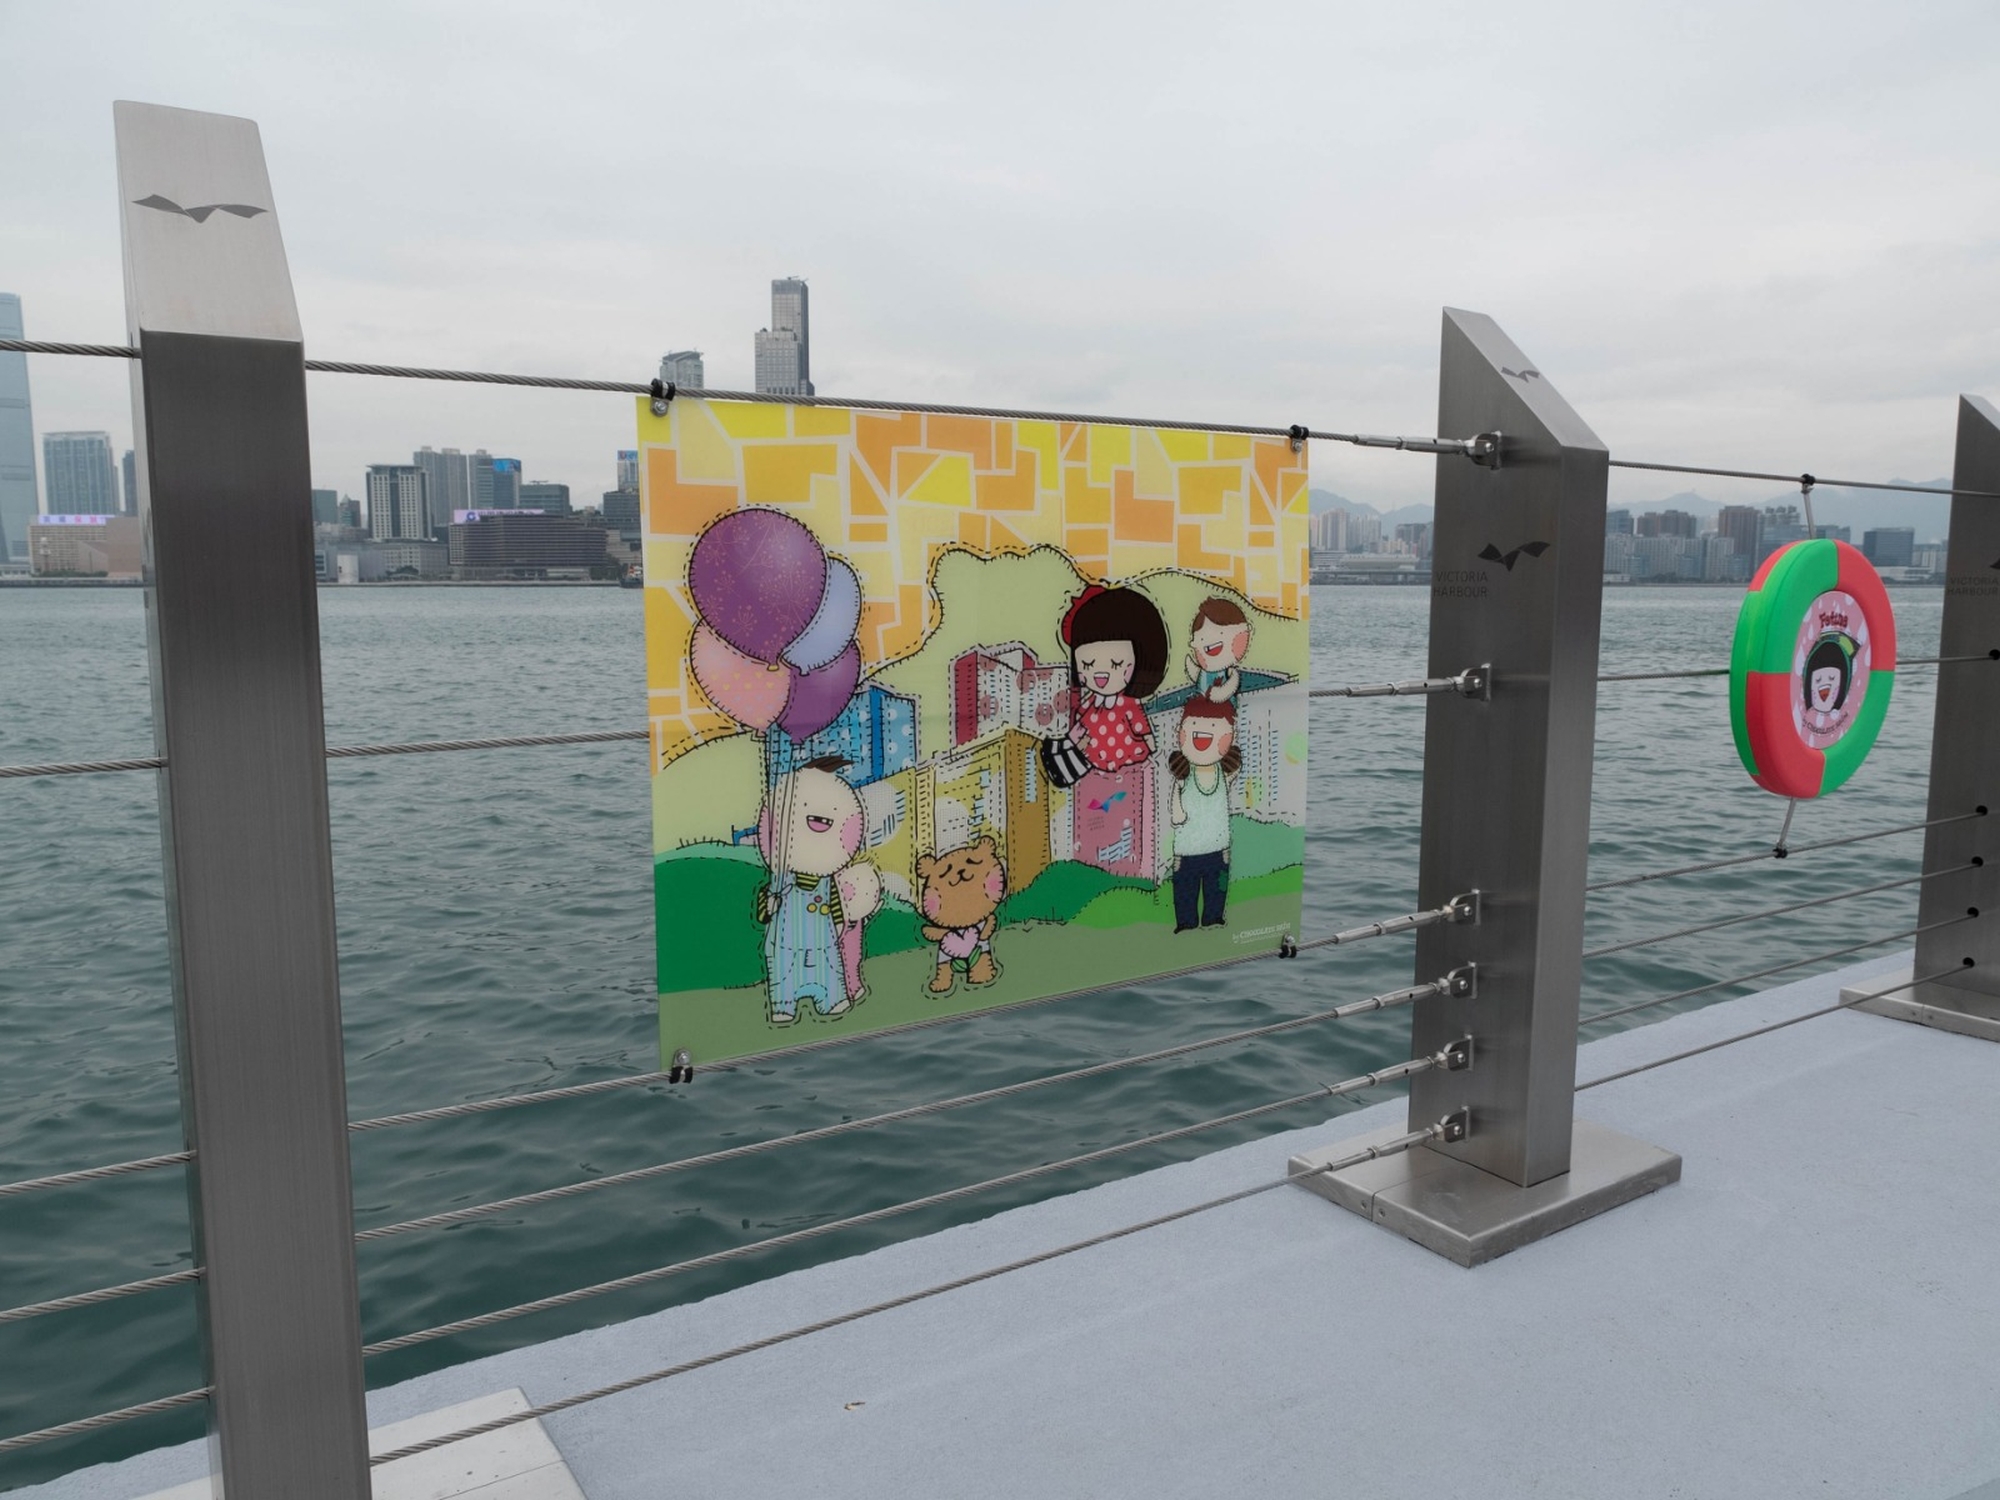 Pictured is the first stage of the approach: a removable fence design, which has been adopted in the Water Sports and Recreation Precinct (Phase 1) opened last year in Wan Chai.